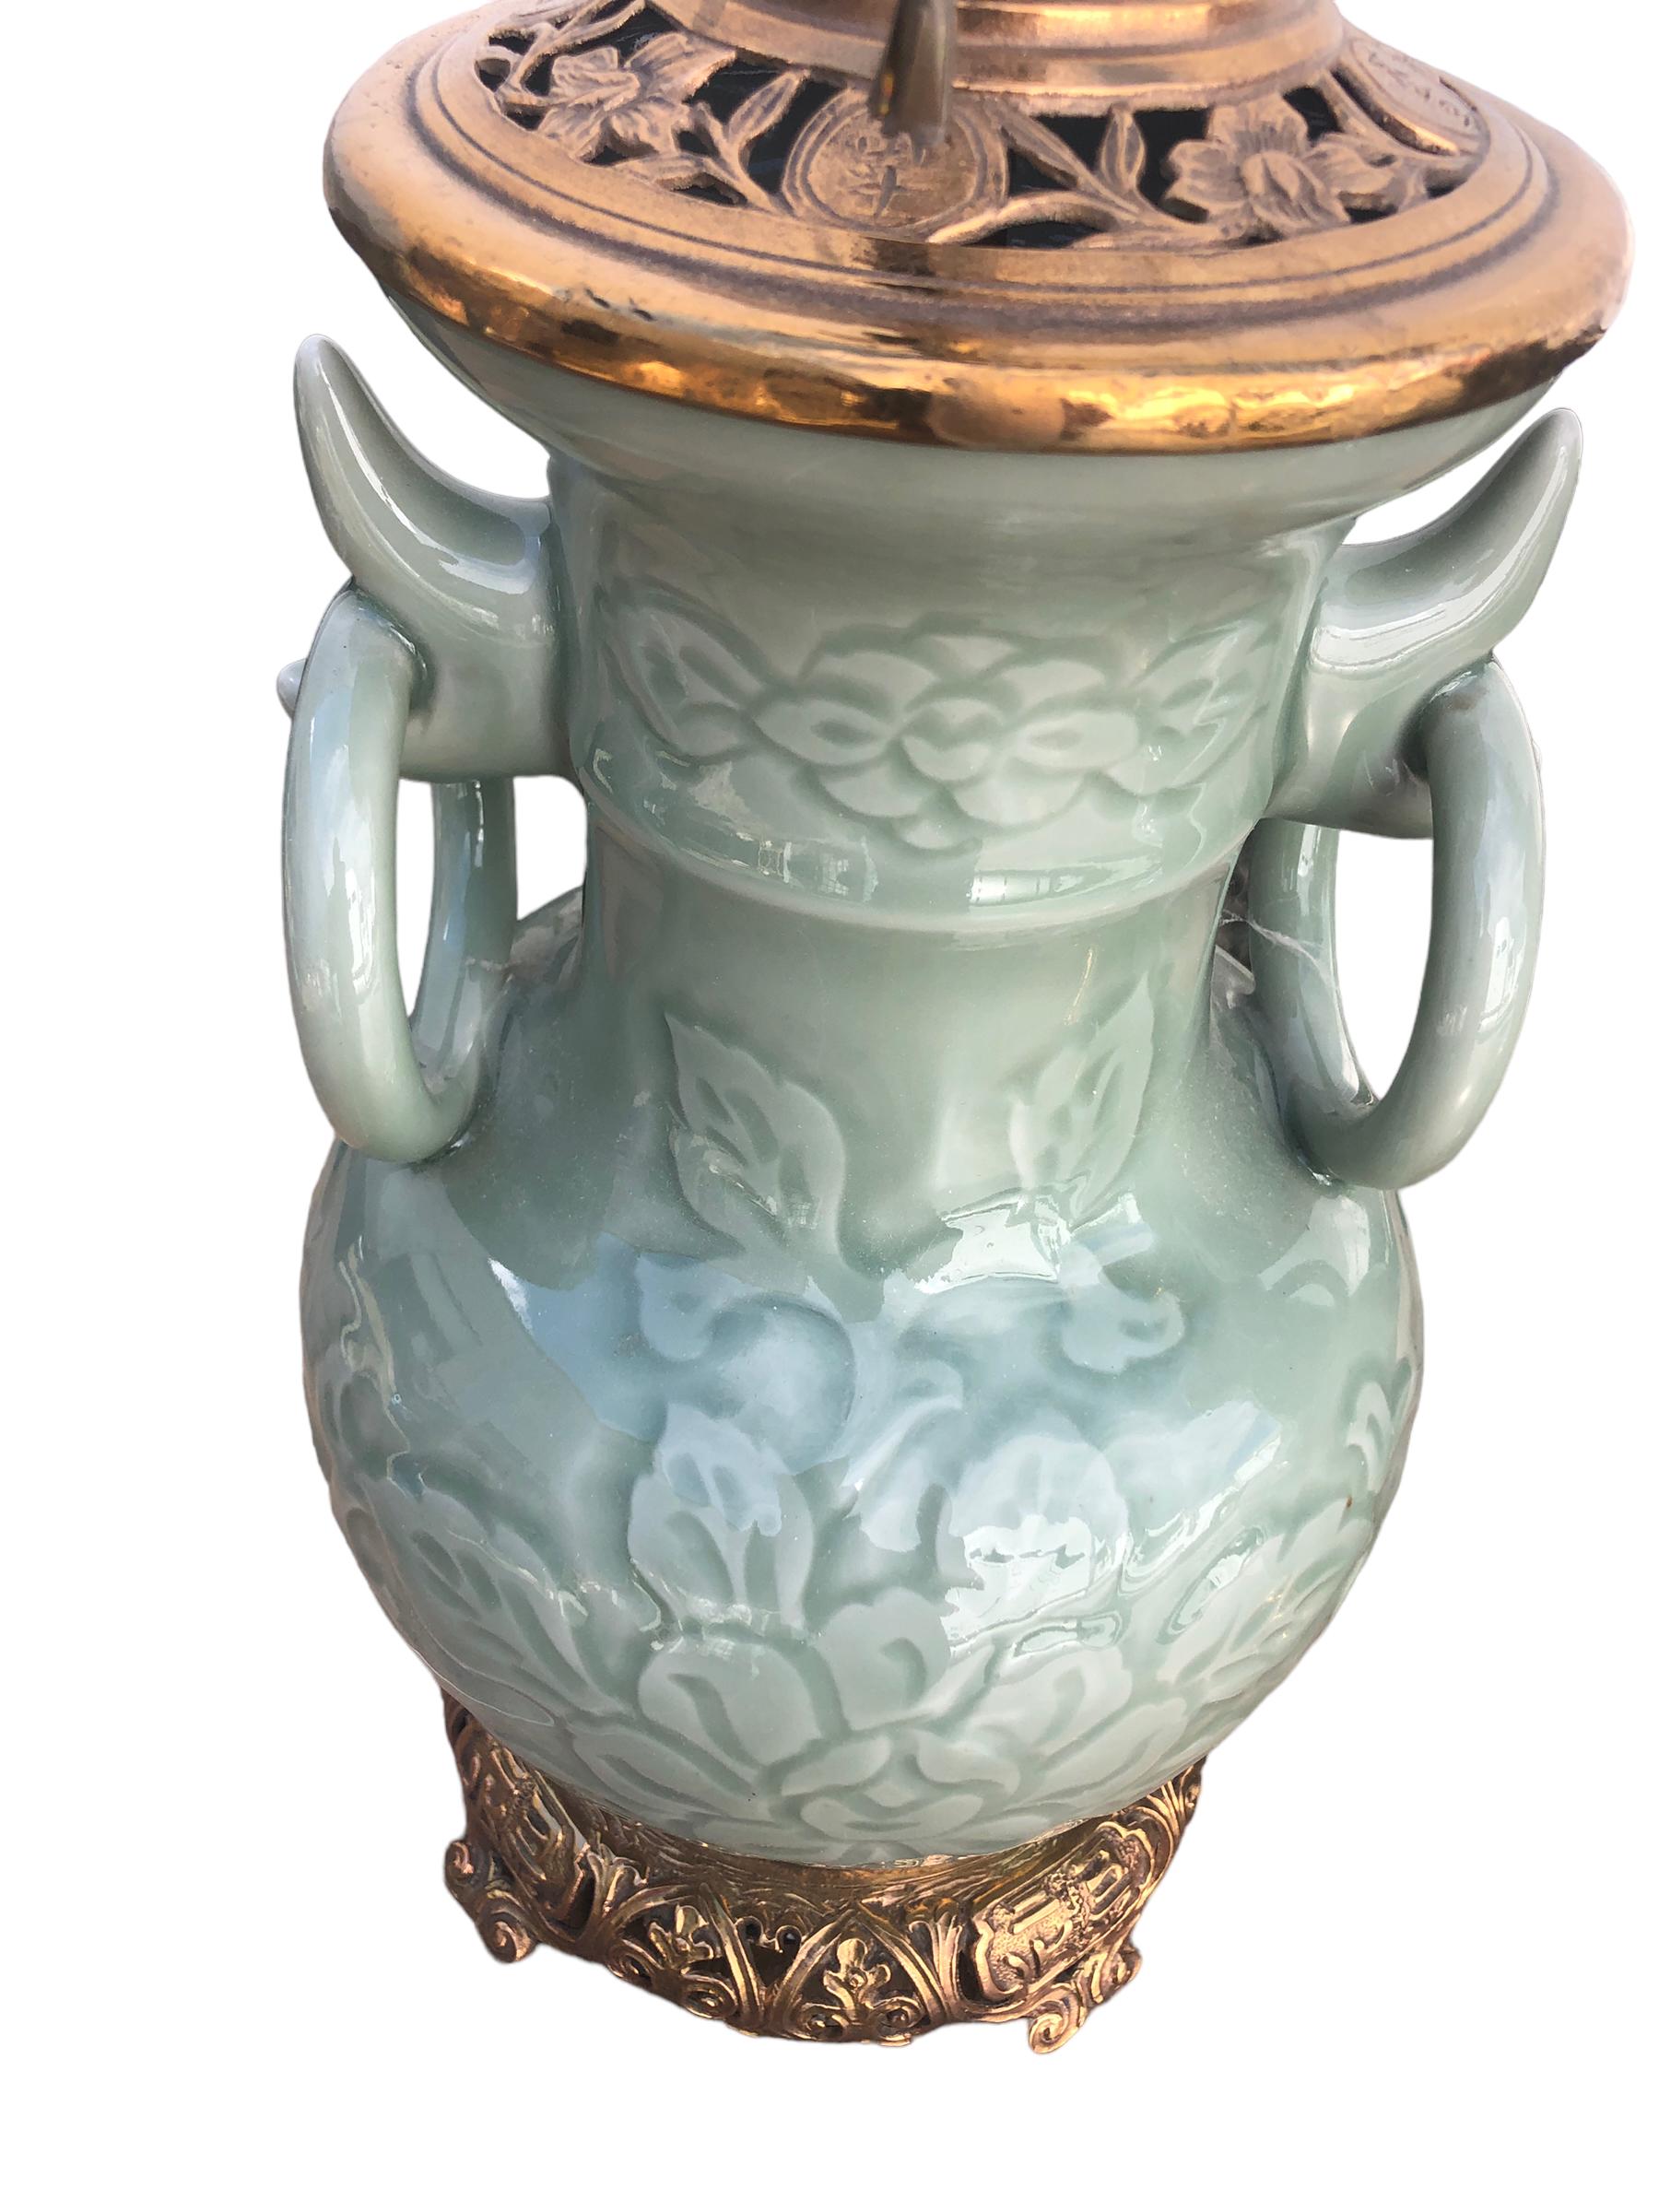 A fine pair of antique Chinese celadon lamps with raised foliate design and large applied rings. Lamps are mounted with Chinese bronze fitting. Lamps were probably electrified in the 1920’s and the mounts date from that period. Wired and in good